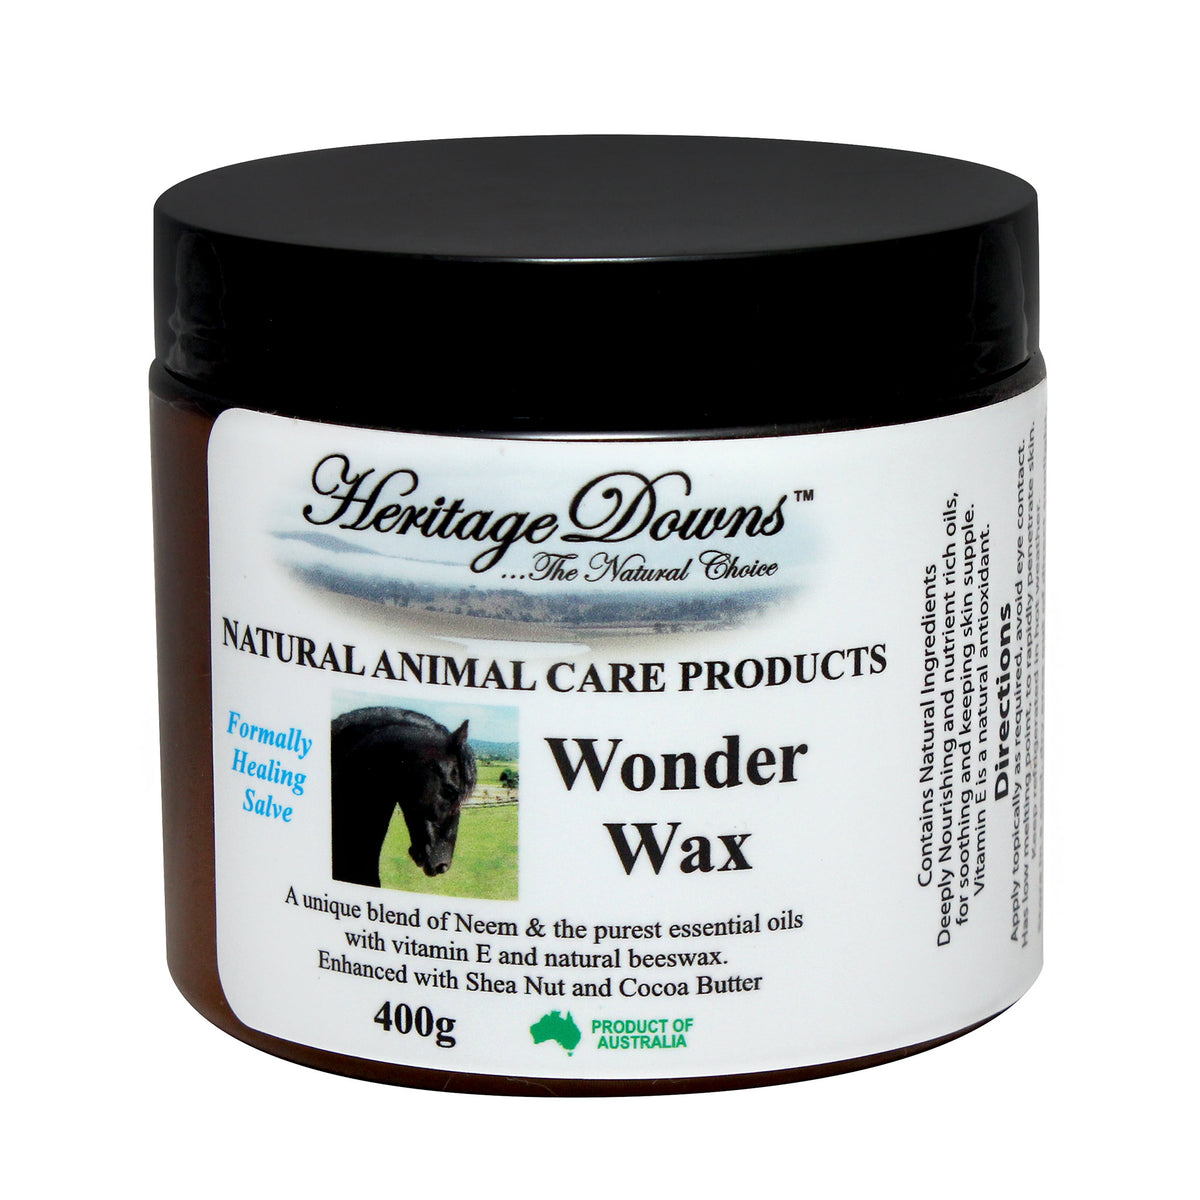 Heritage Downs Wonder Wax with Essential Oils and Vitamin E